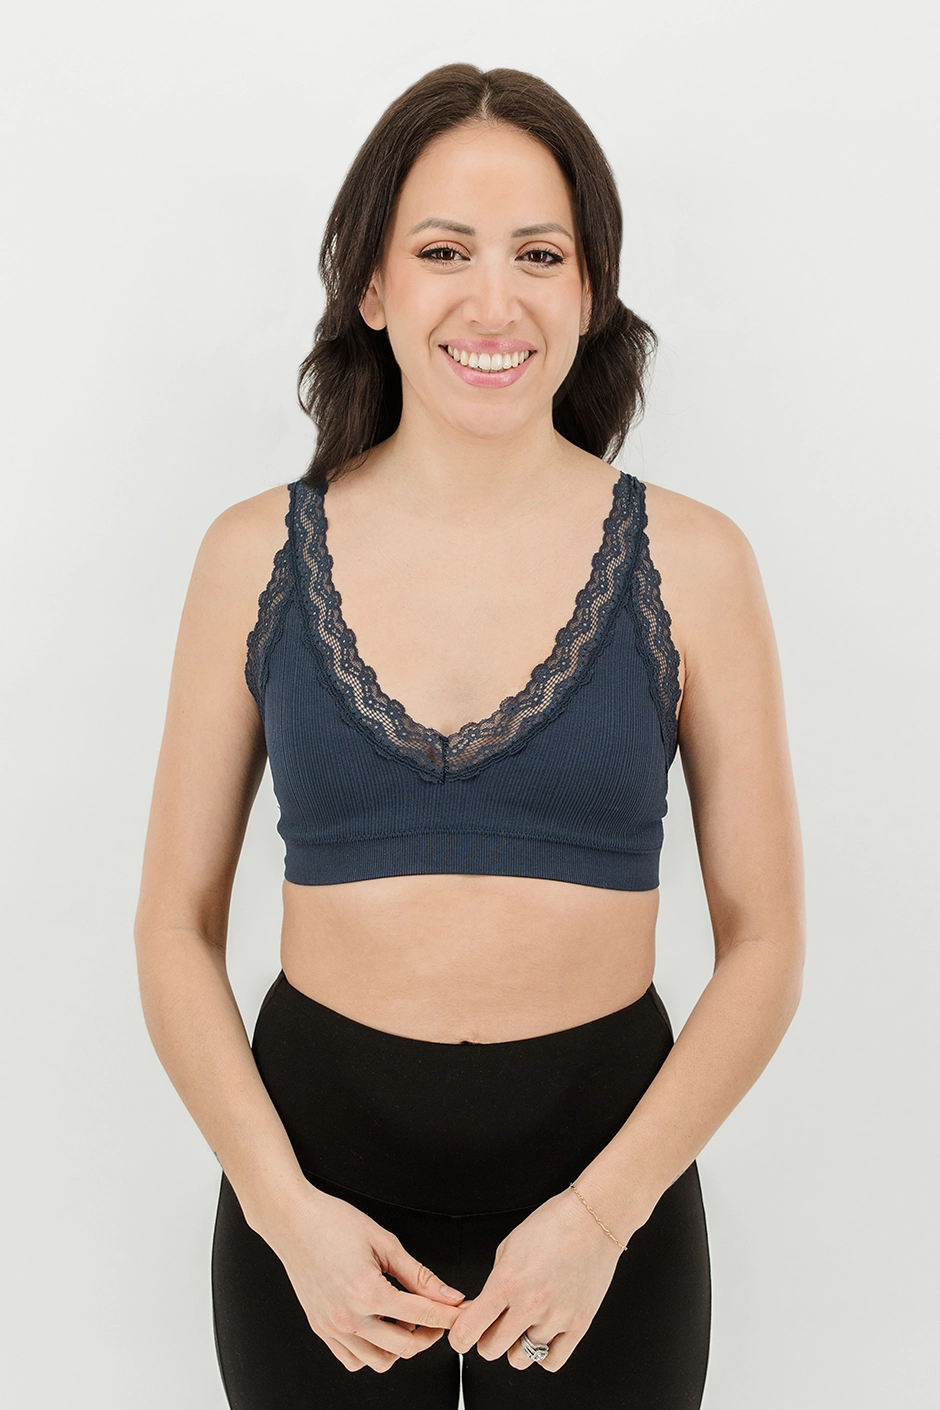 https://c211747605cdf5d8cd74-f50fbe37b046904c7c00bee626e99452.ssl.cf2.rackcdn.com/images/products/simple_bliss_bralette_navy_1_1703201294_lg.webp